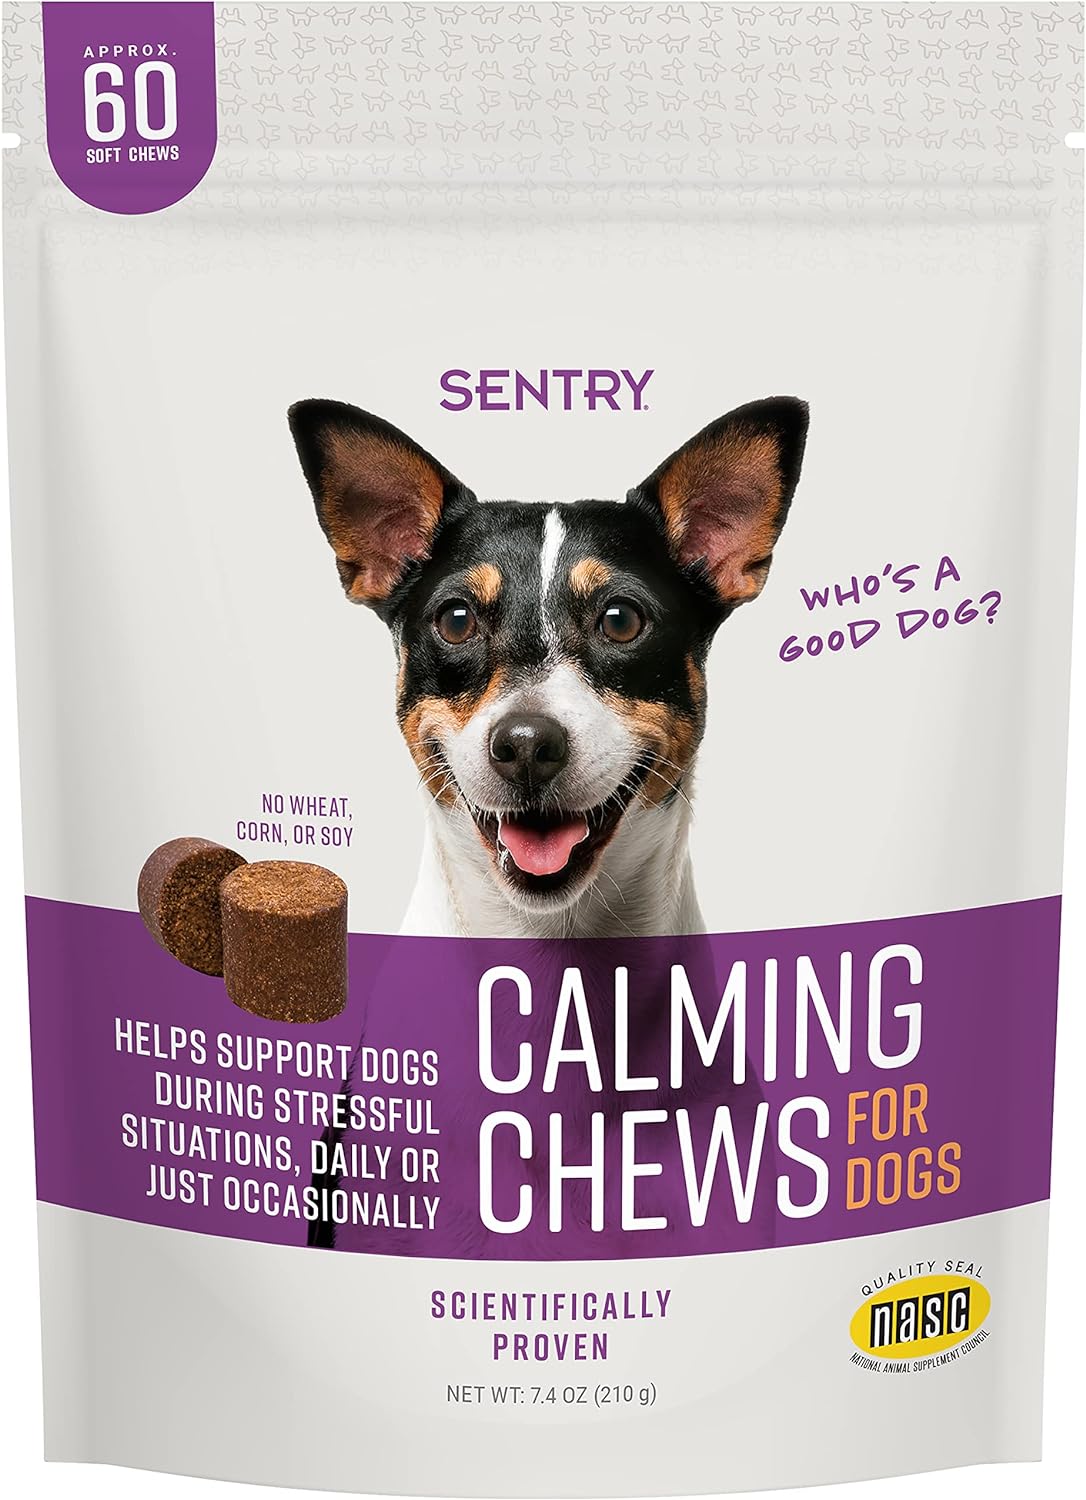 Sentry Calming Chews for Dogs, Calming Aid Helps to Manage Stress & Anxiety, with Pheromones That May Help Curb Destructive Behavior & Separation Anxiety, Calming Health Supplement for Dogs, 60 Count